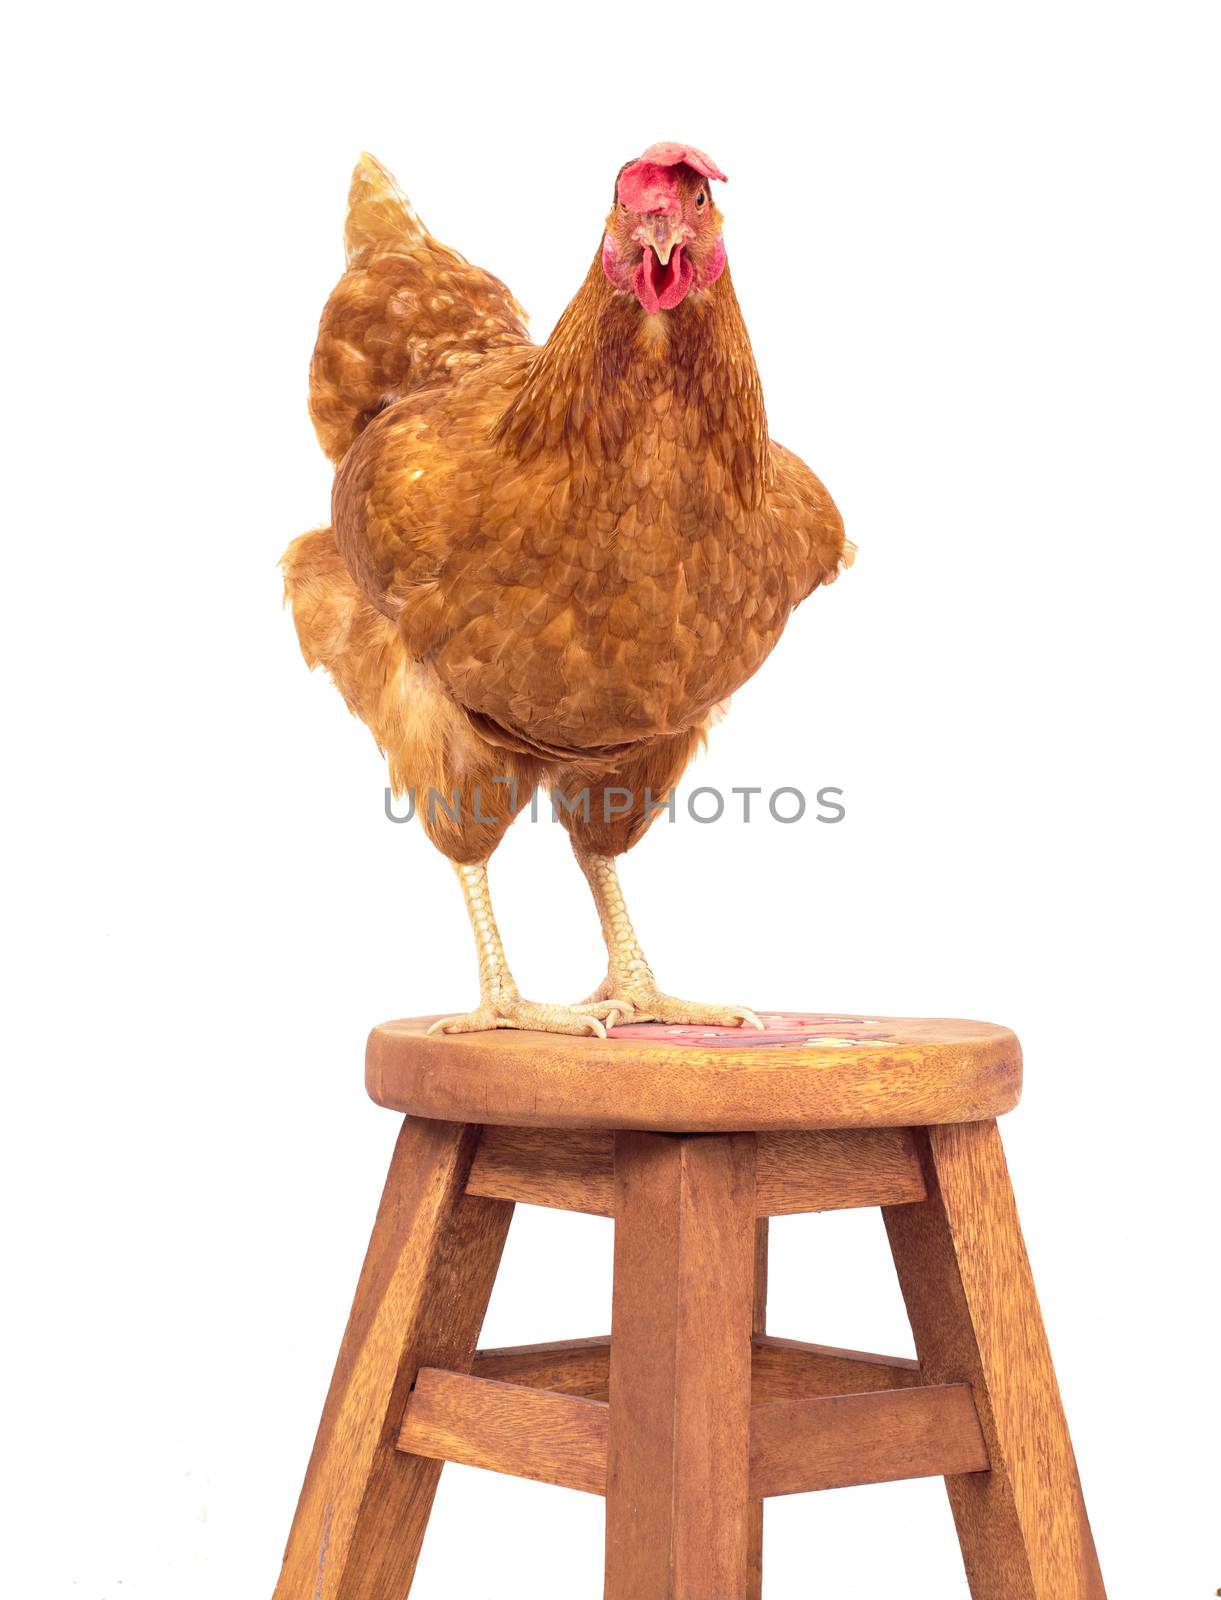 brown rooster standing on wood desk and looking eyes contact isolated white background